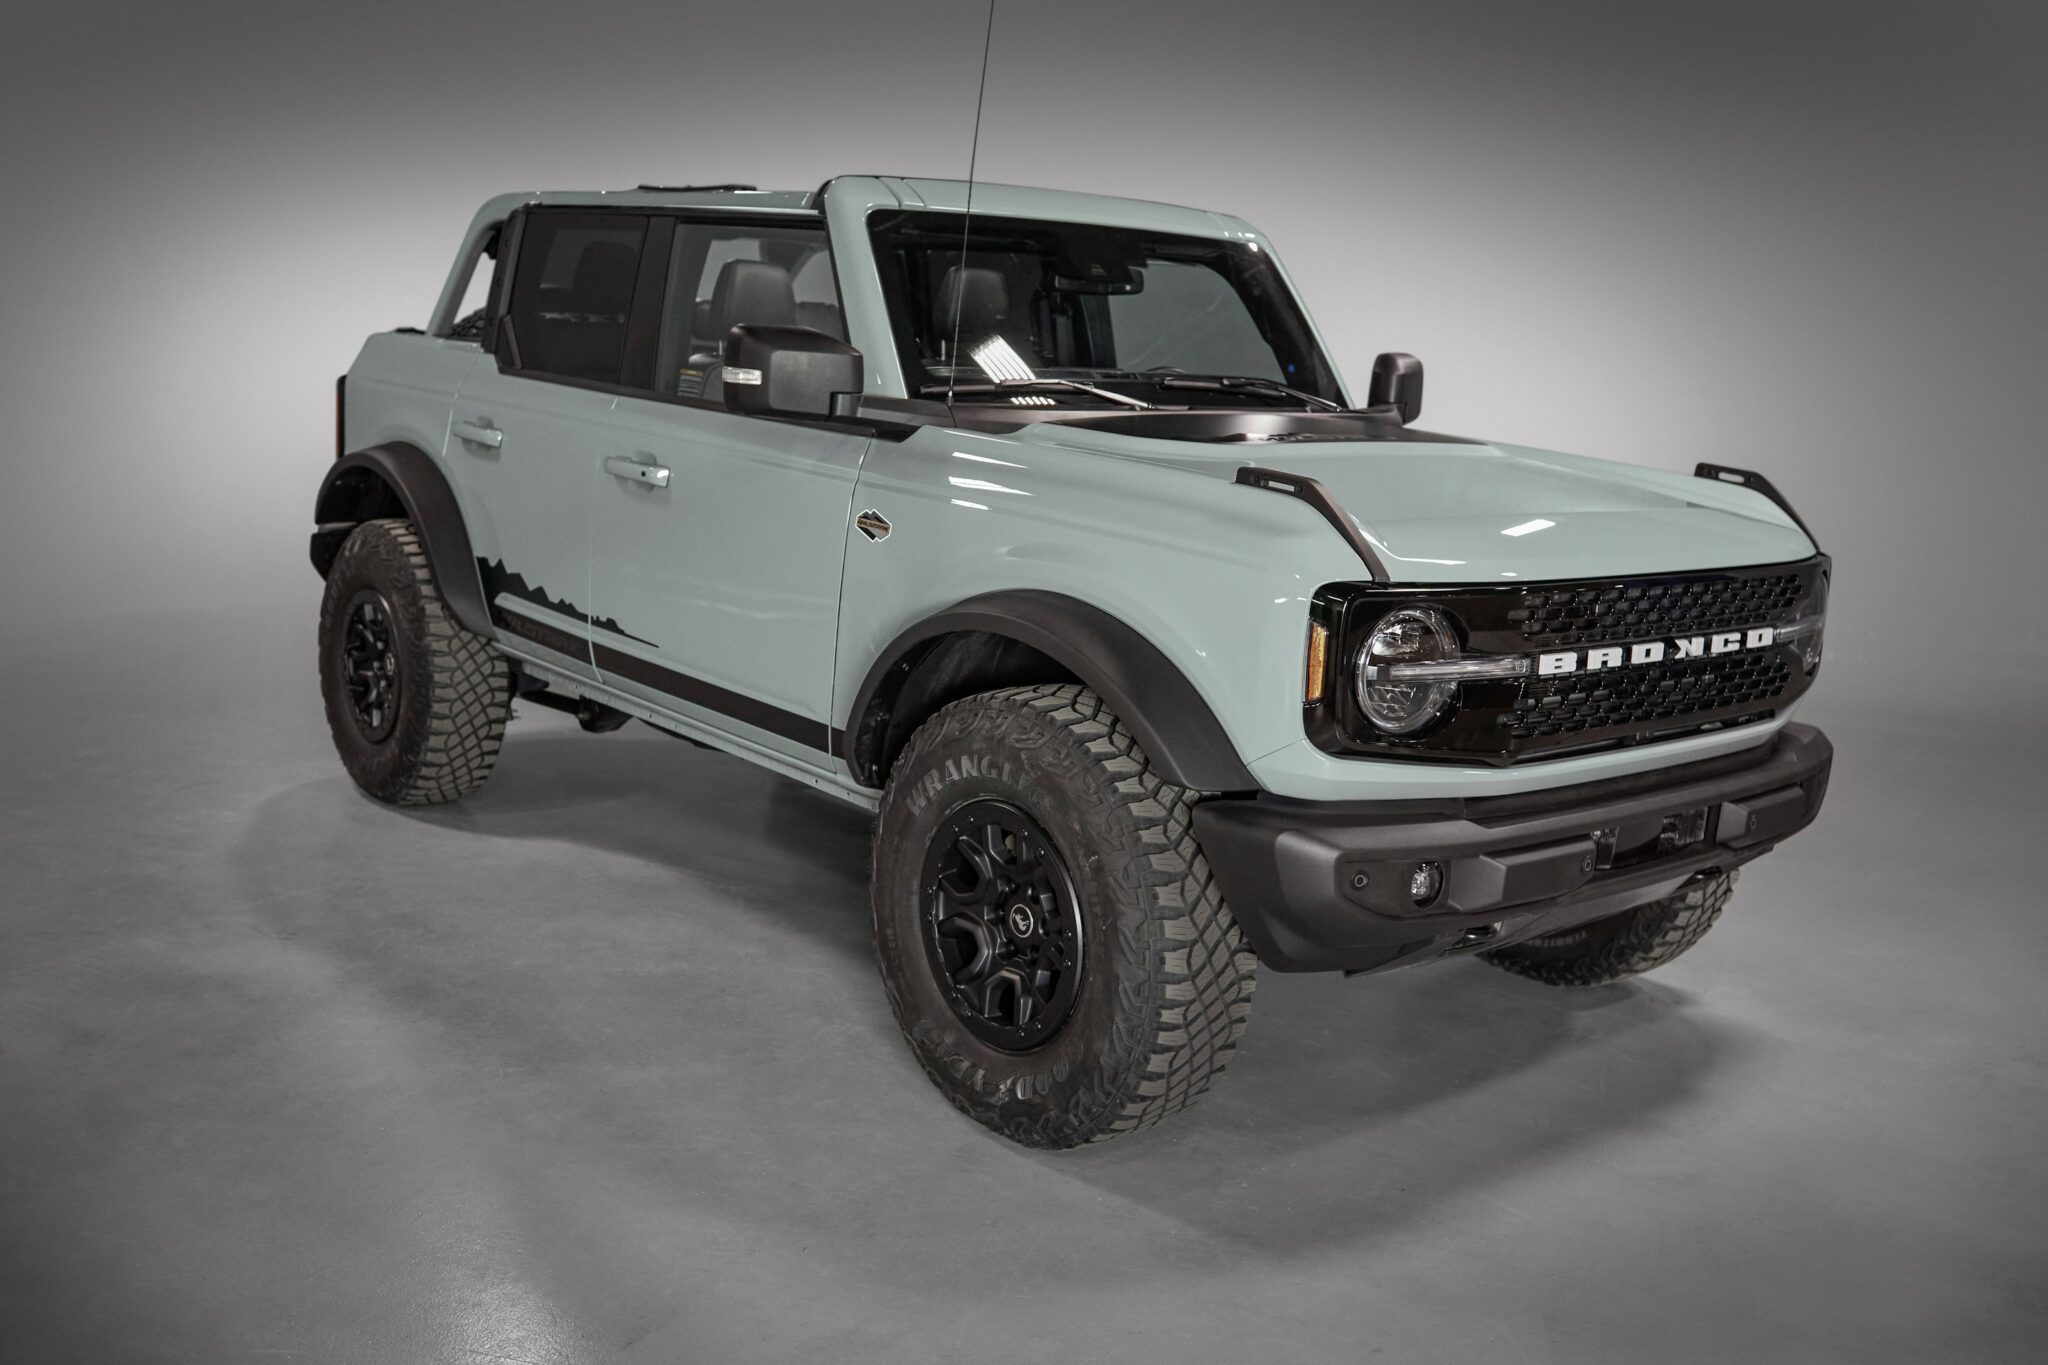 Fully electric Ford Bronco is happening, suggests company CEO